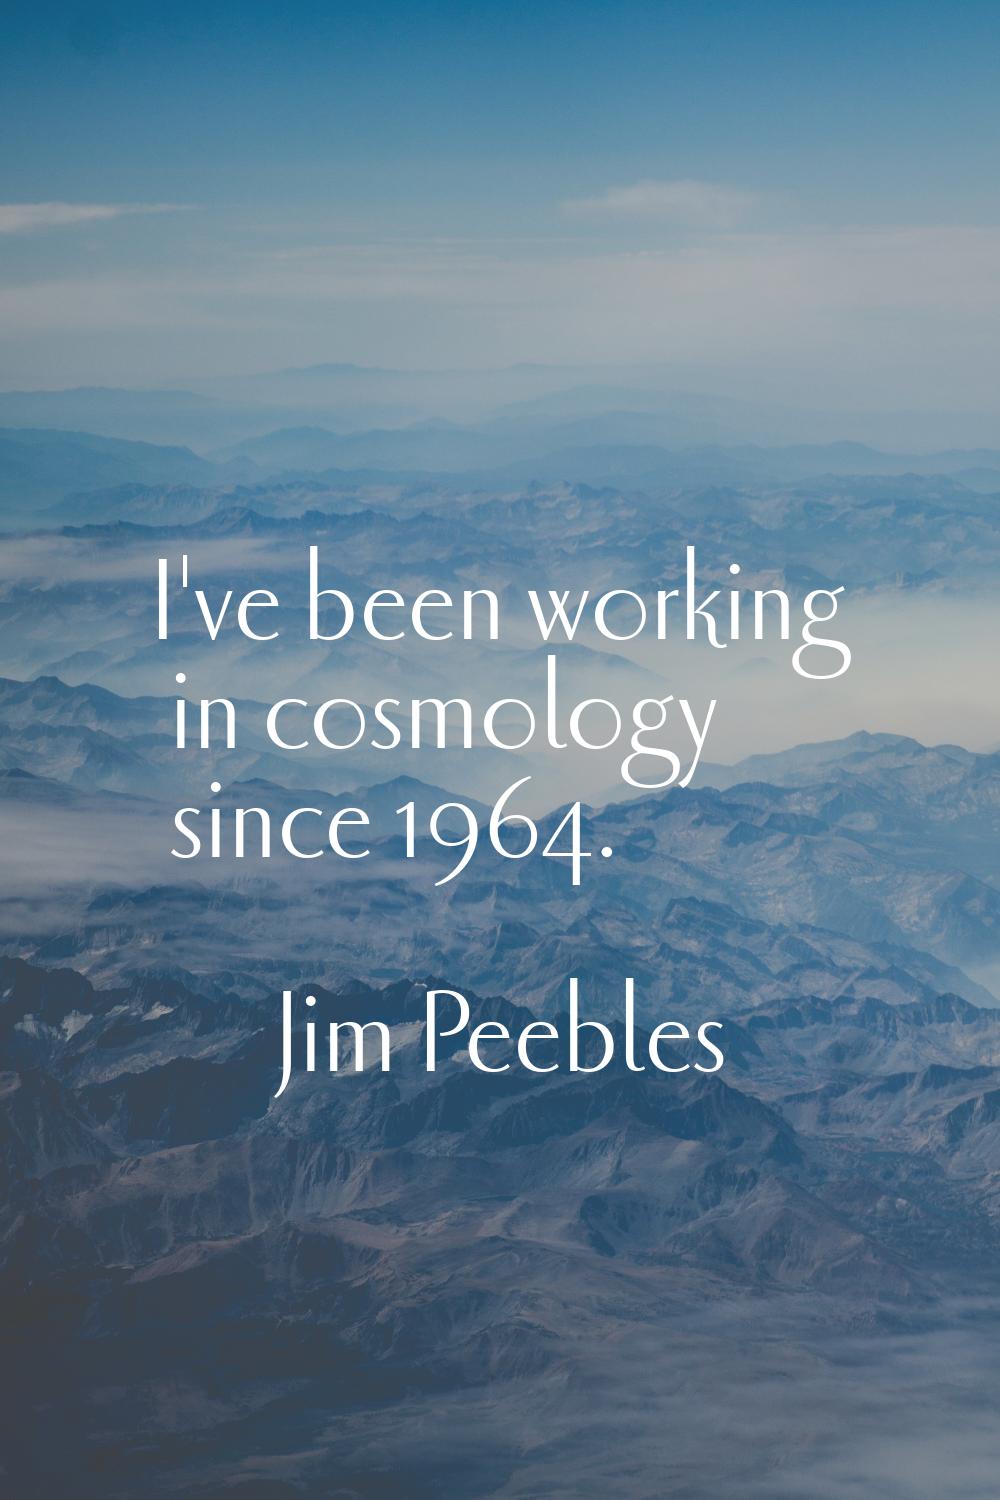 I've been working in cosmology since 1964.